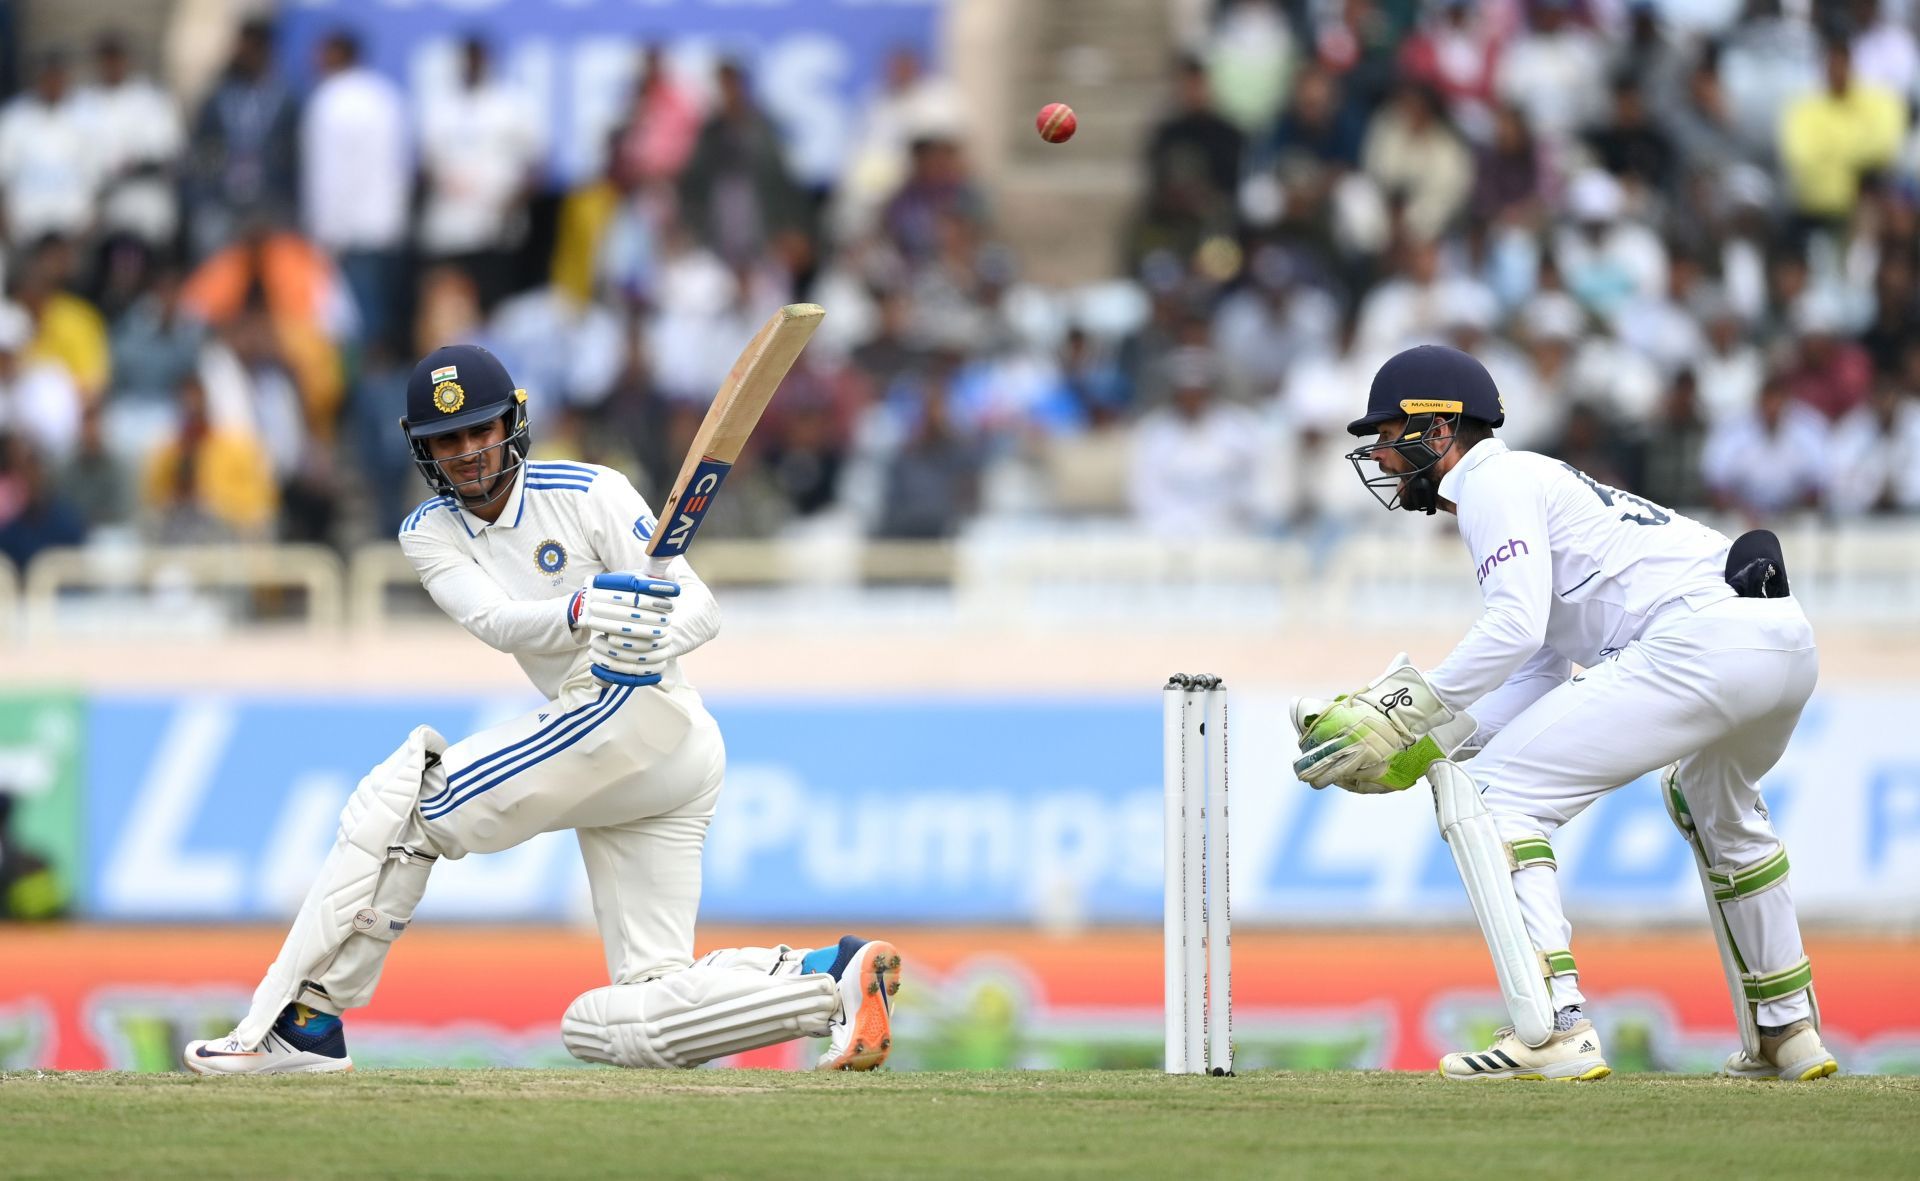 The right-handed batter in action during the Ranchi Test. (Pic: Getty Images)